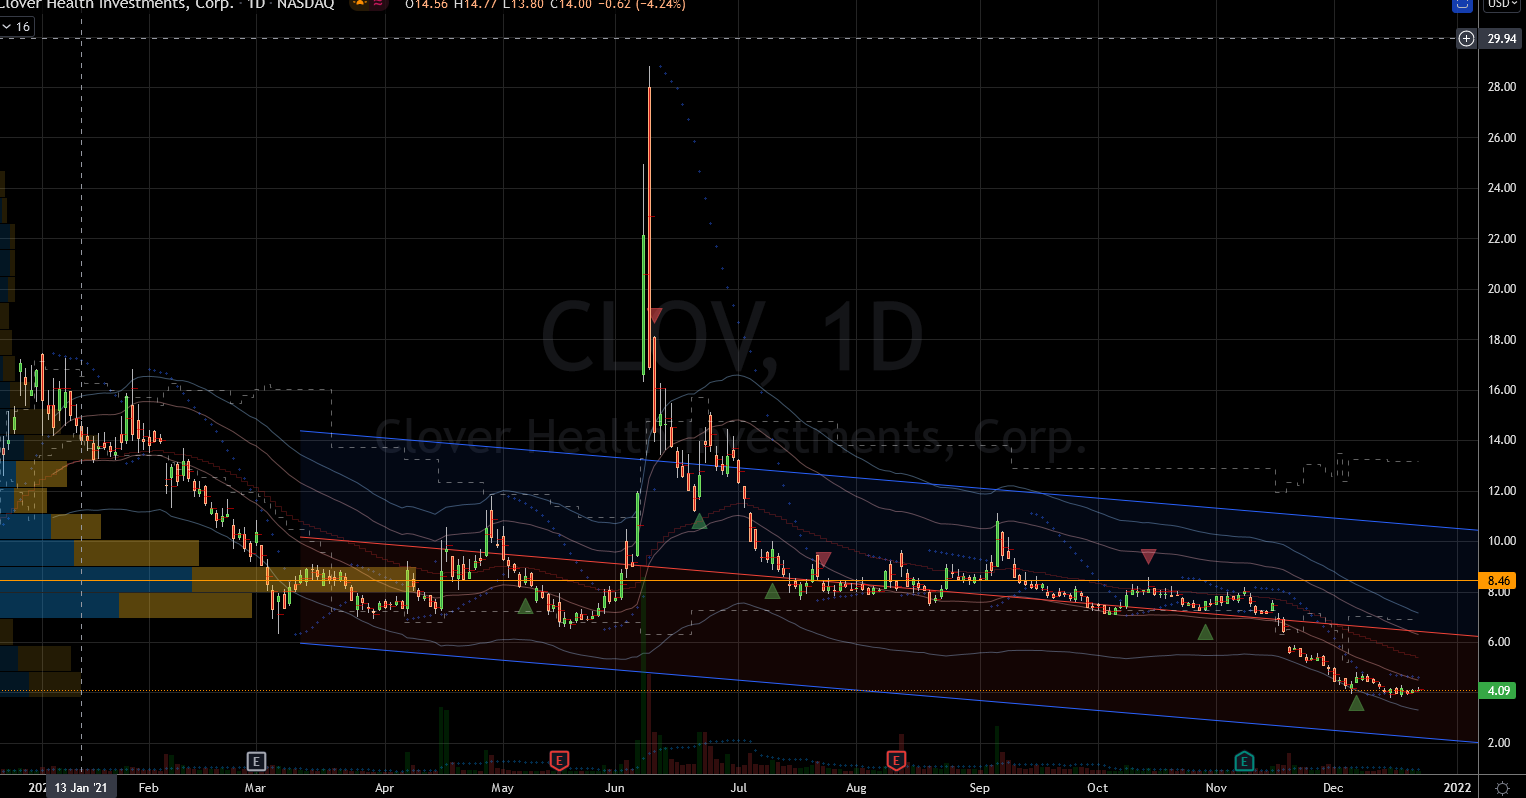 Stocks to Buy: Clover Health (CLOV) Stock Chart Showing Potential Base